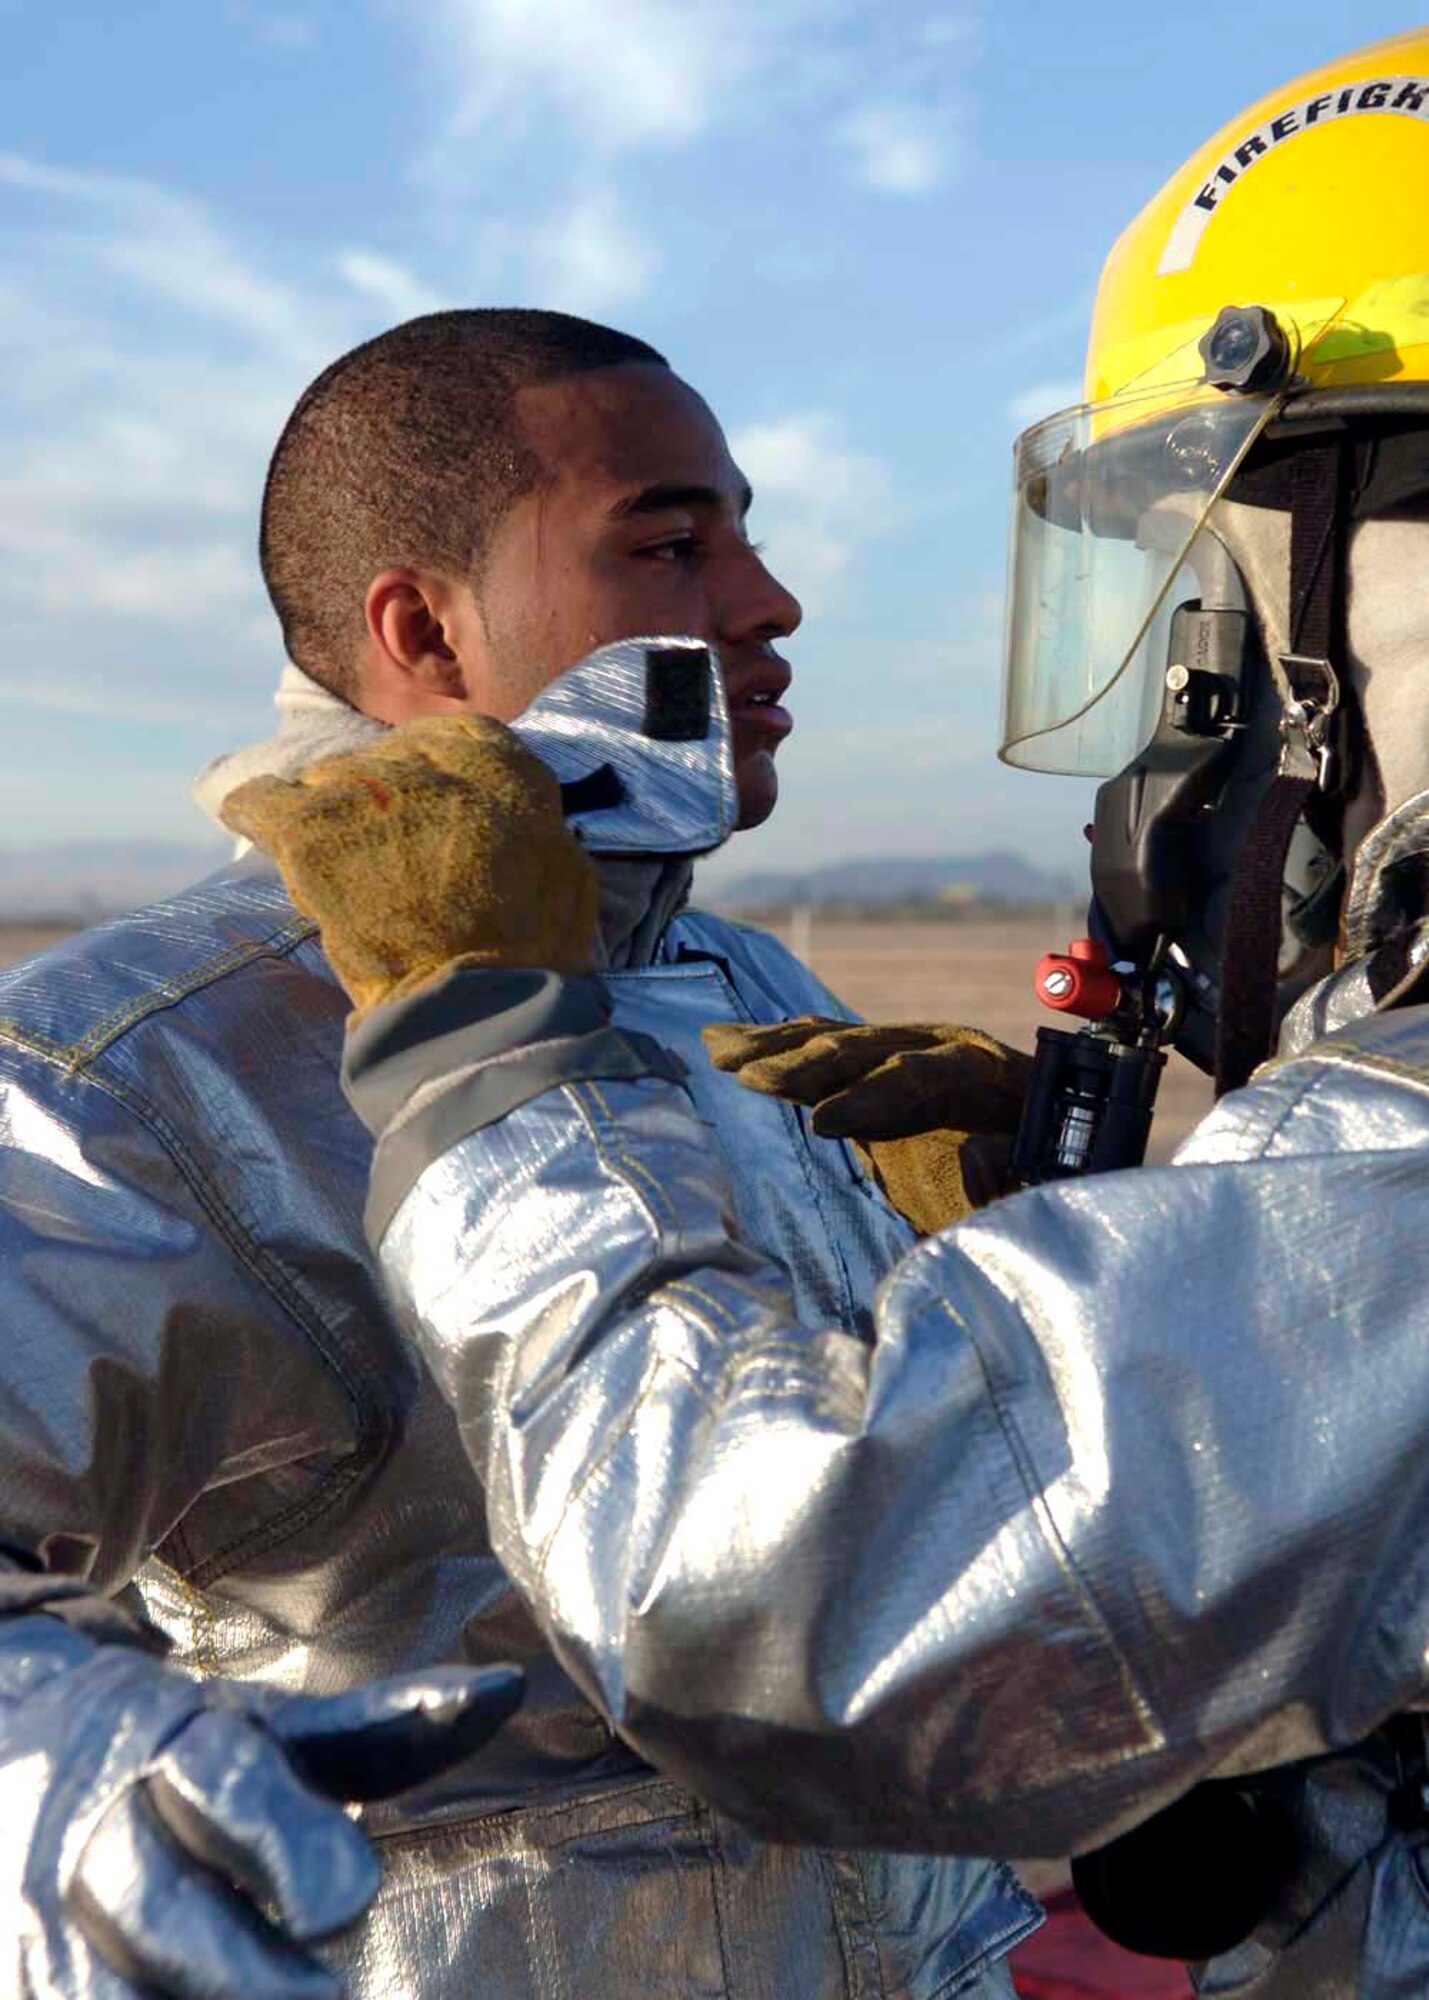 A Davis-Monthan Air Force Base firefighter helps out a fellow wingman as part of processing through the decontamination stations Dec. 4 at Davis-Monthan AFB, Ariz. Exercise Vigilant Shield 07 is a joint Department of Defense and federal nuclear weapon accident exercise. The exercise scenario involved a C-17 Globemaster III carrying four nuclear weapons to be diverted to Davis-Monthan AFB due to simulated engine failure that caused an aircraft accident. Davis-Monthan firefighters, the Tucson Fire Department, Tucson Police Department, and many different agencies ranging form local to national levels responded to the simulated scene. (U.S. Air Force photo/Senior Airman Christina D. Ponte)